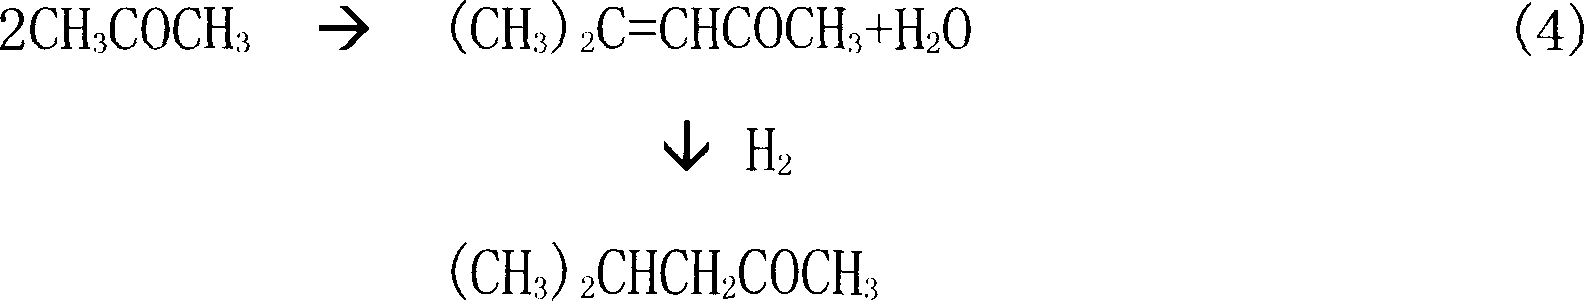 Process for separating methylisobutanone synthesized from acetone